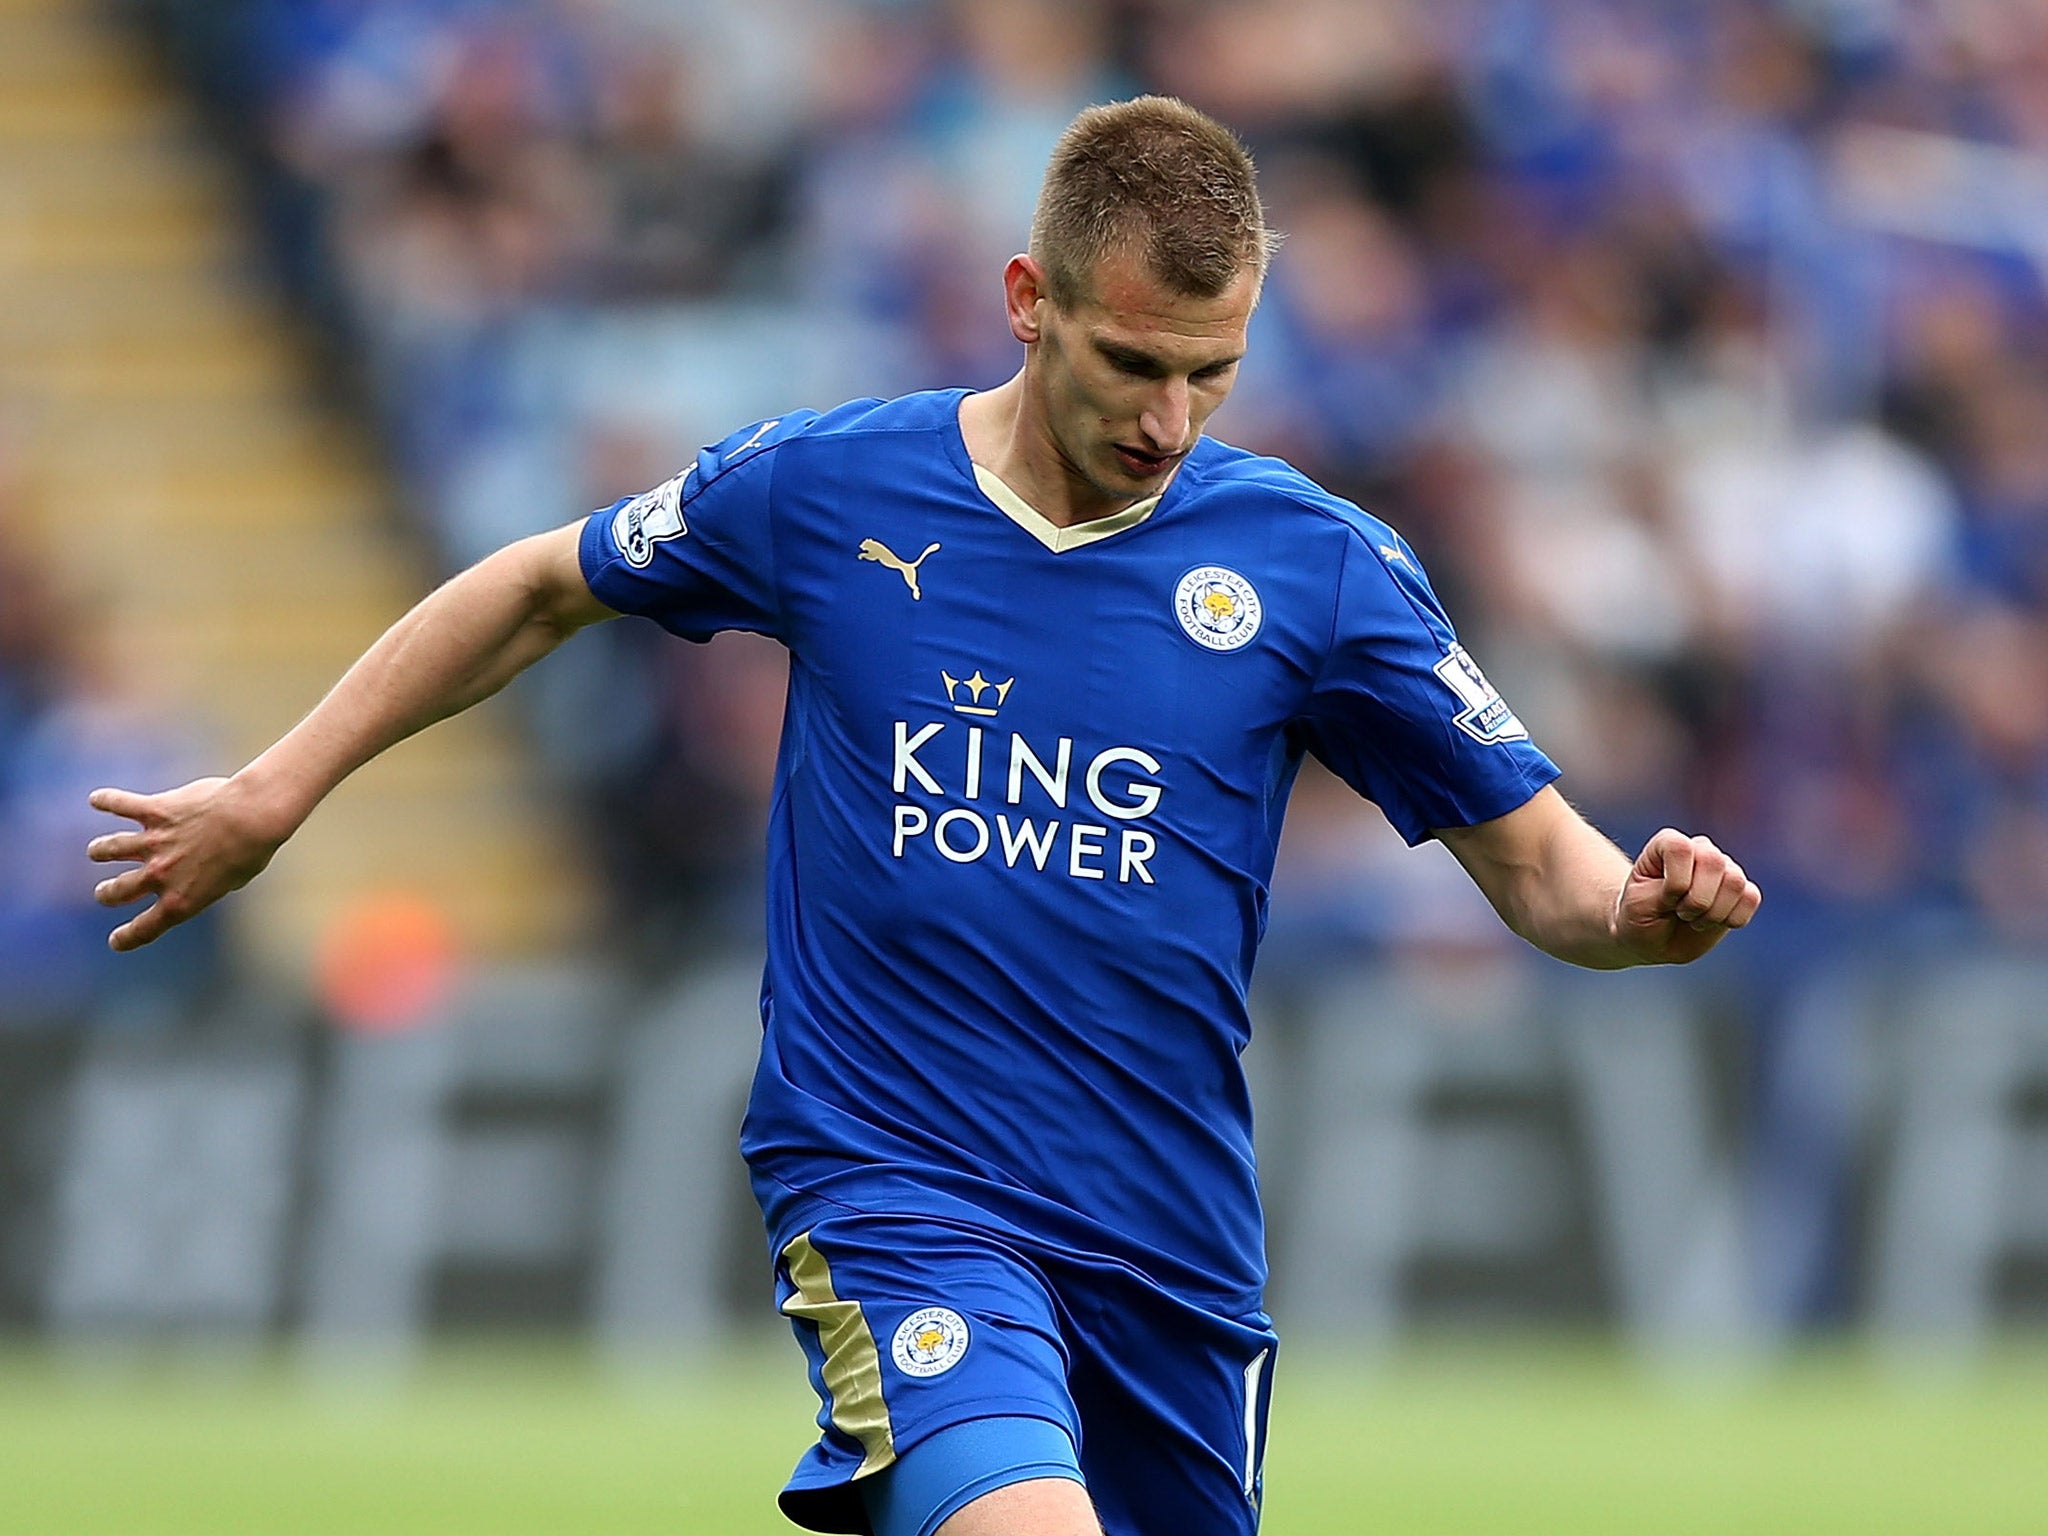 The mother of football player Marc Albrighton's partner was among the victims of the Tunisia attack